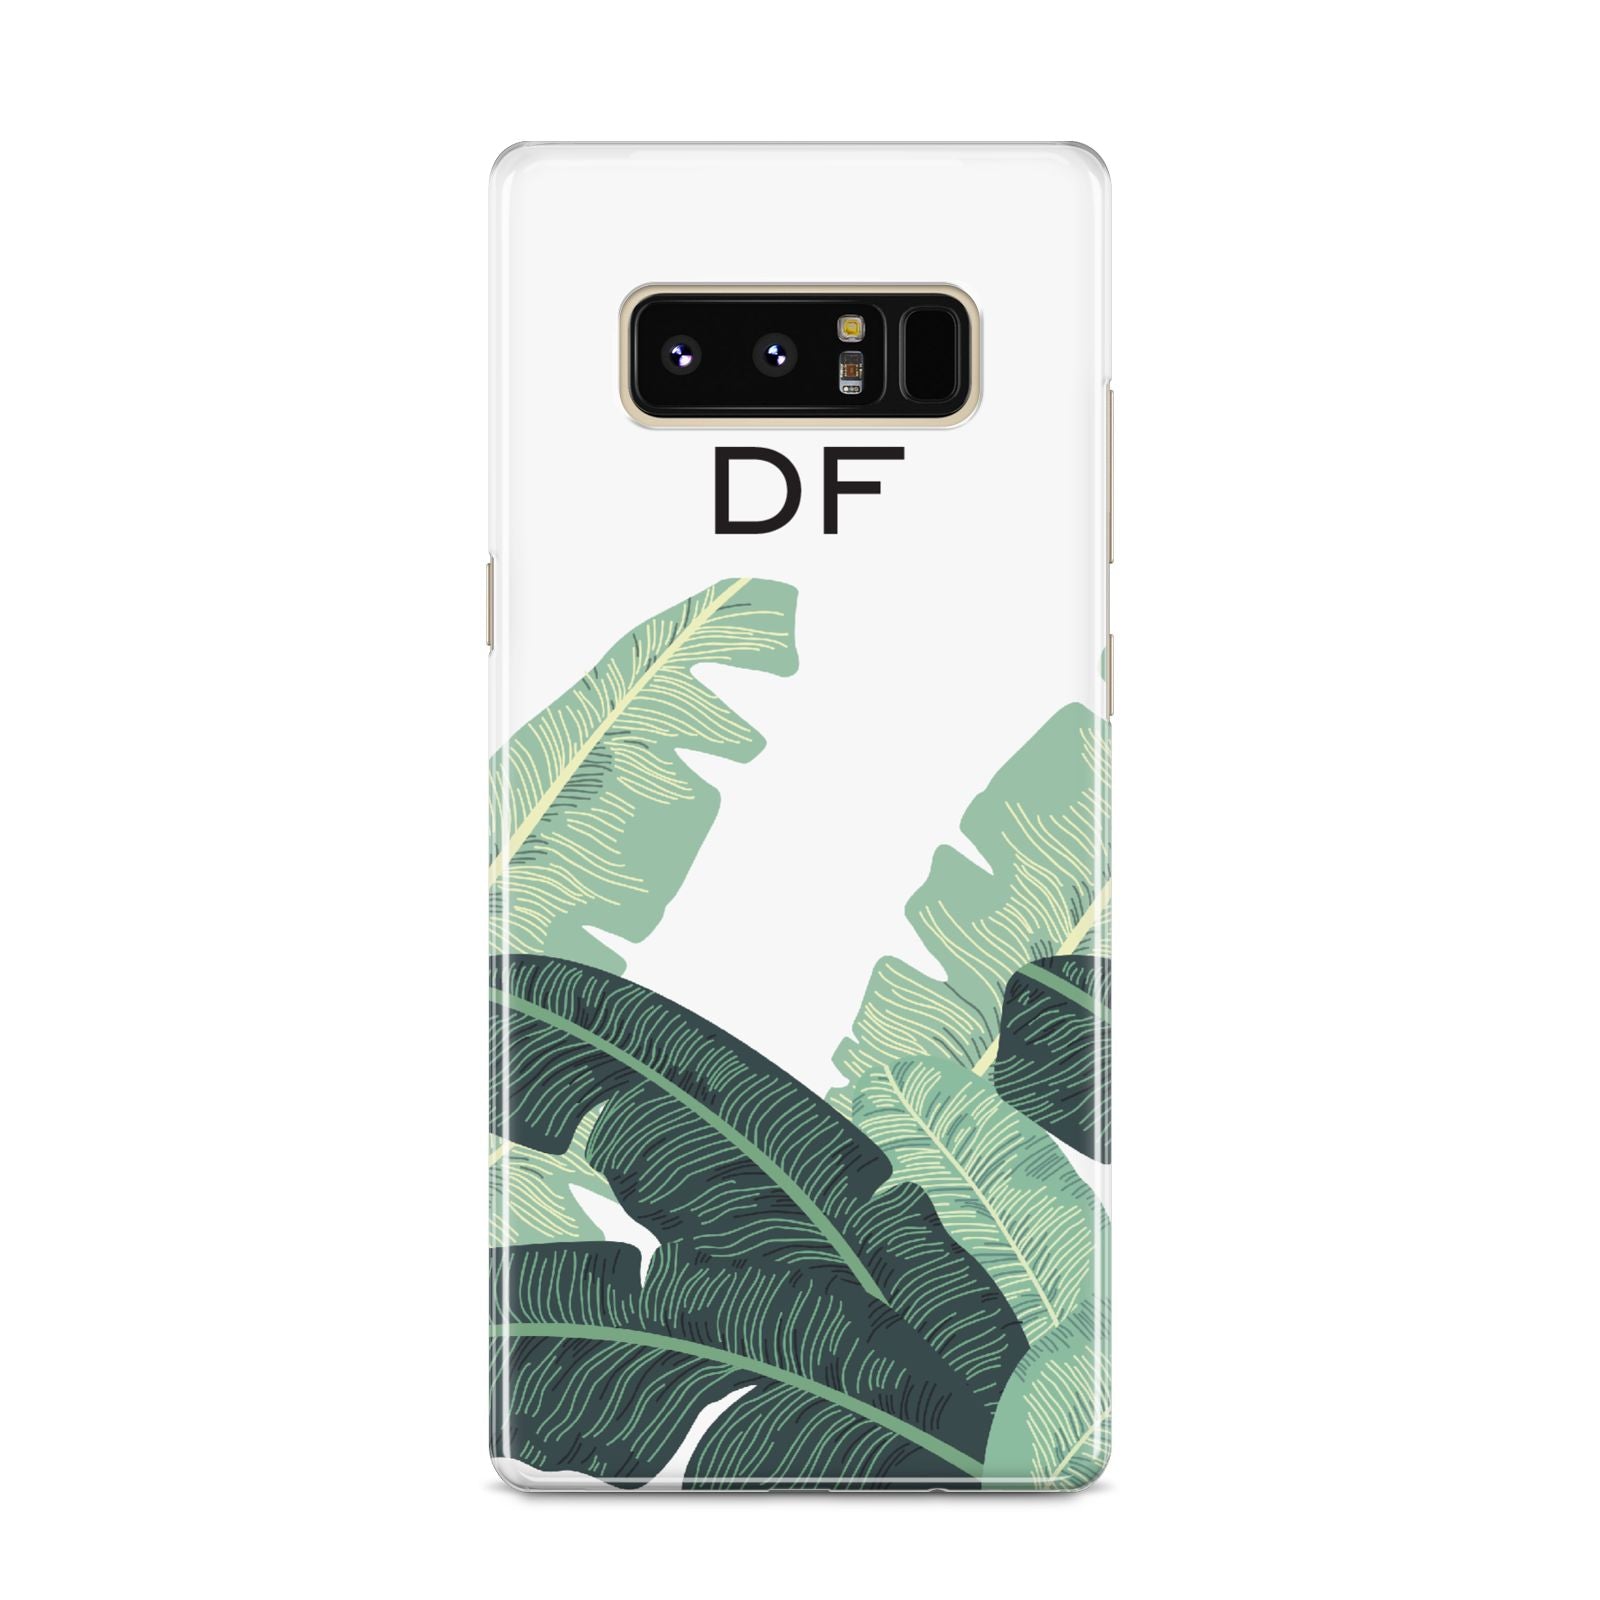 Personalised White Banana Leaf Samsung Galaxy S8 Case